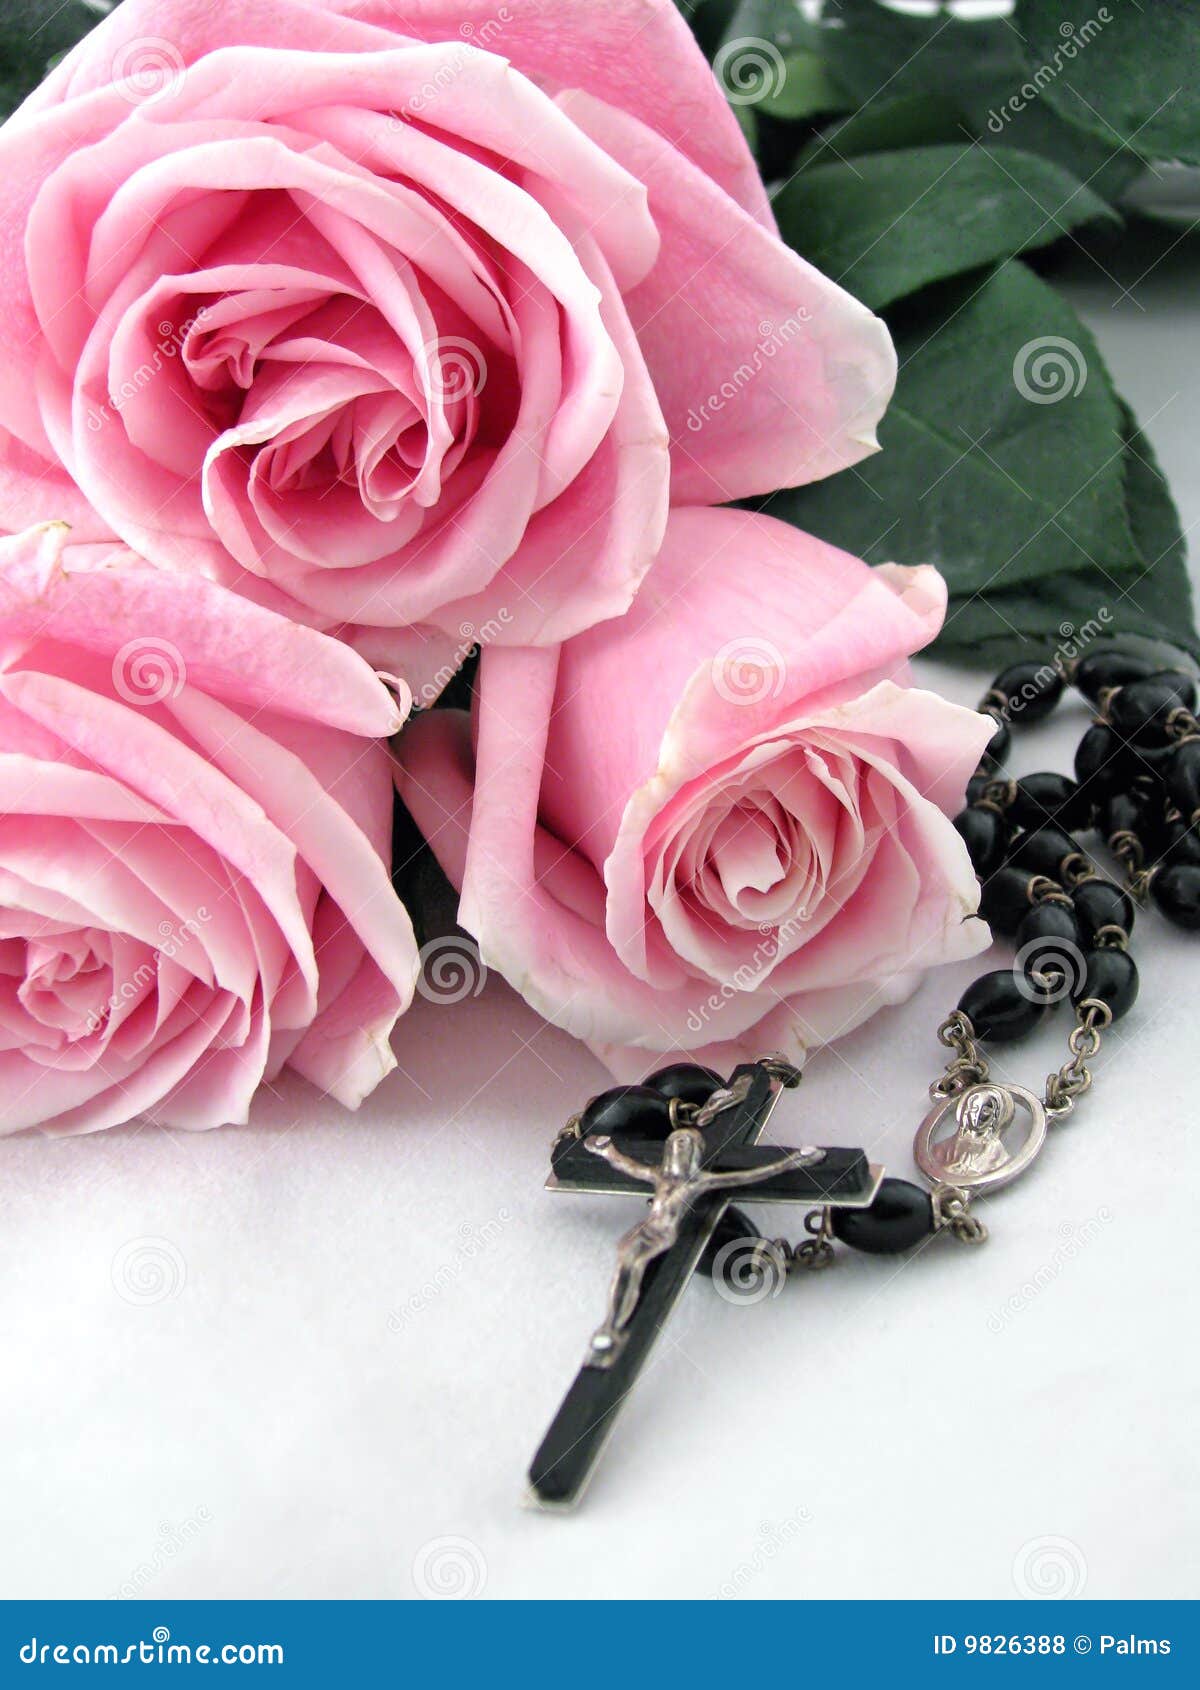 rosary cross and pink roses